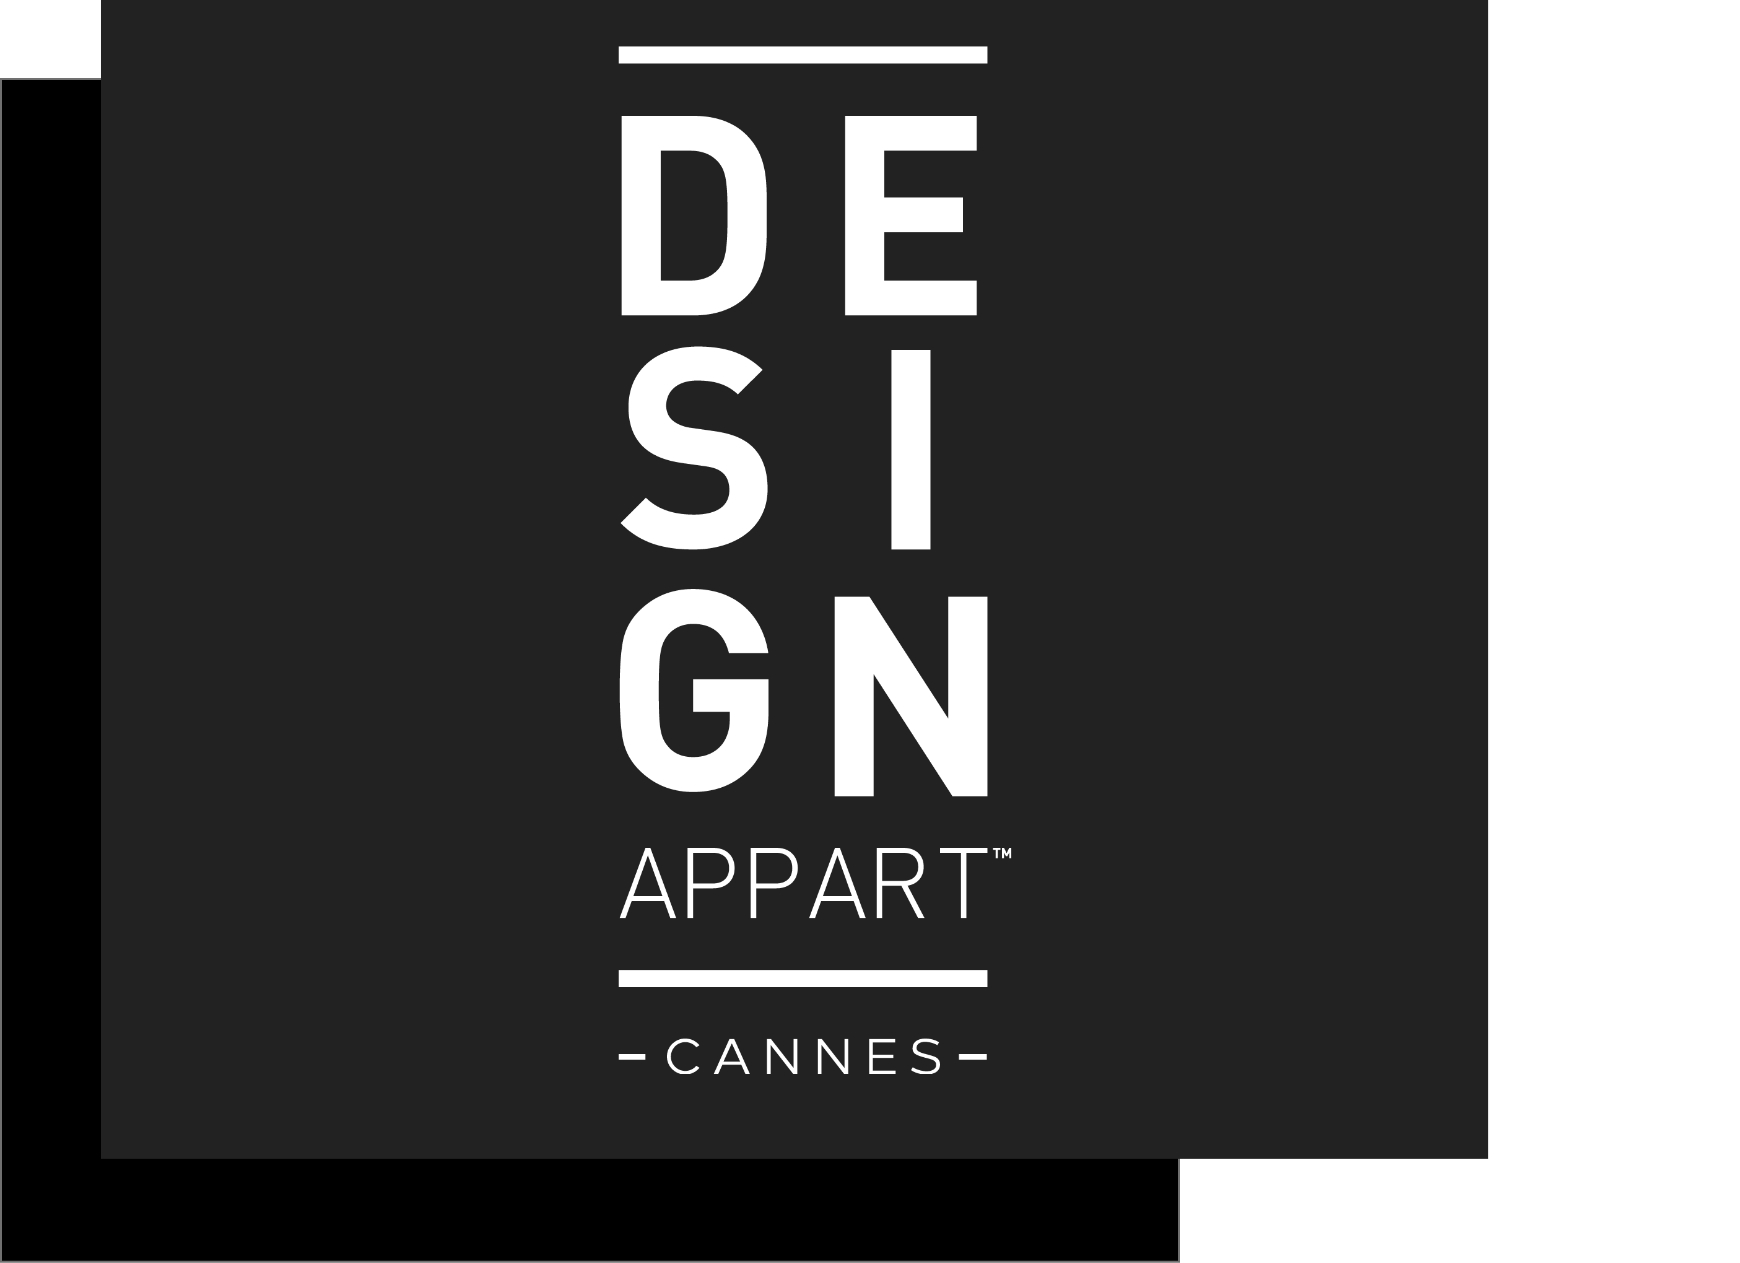 design appart cannes agence karma communication